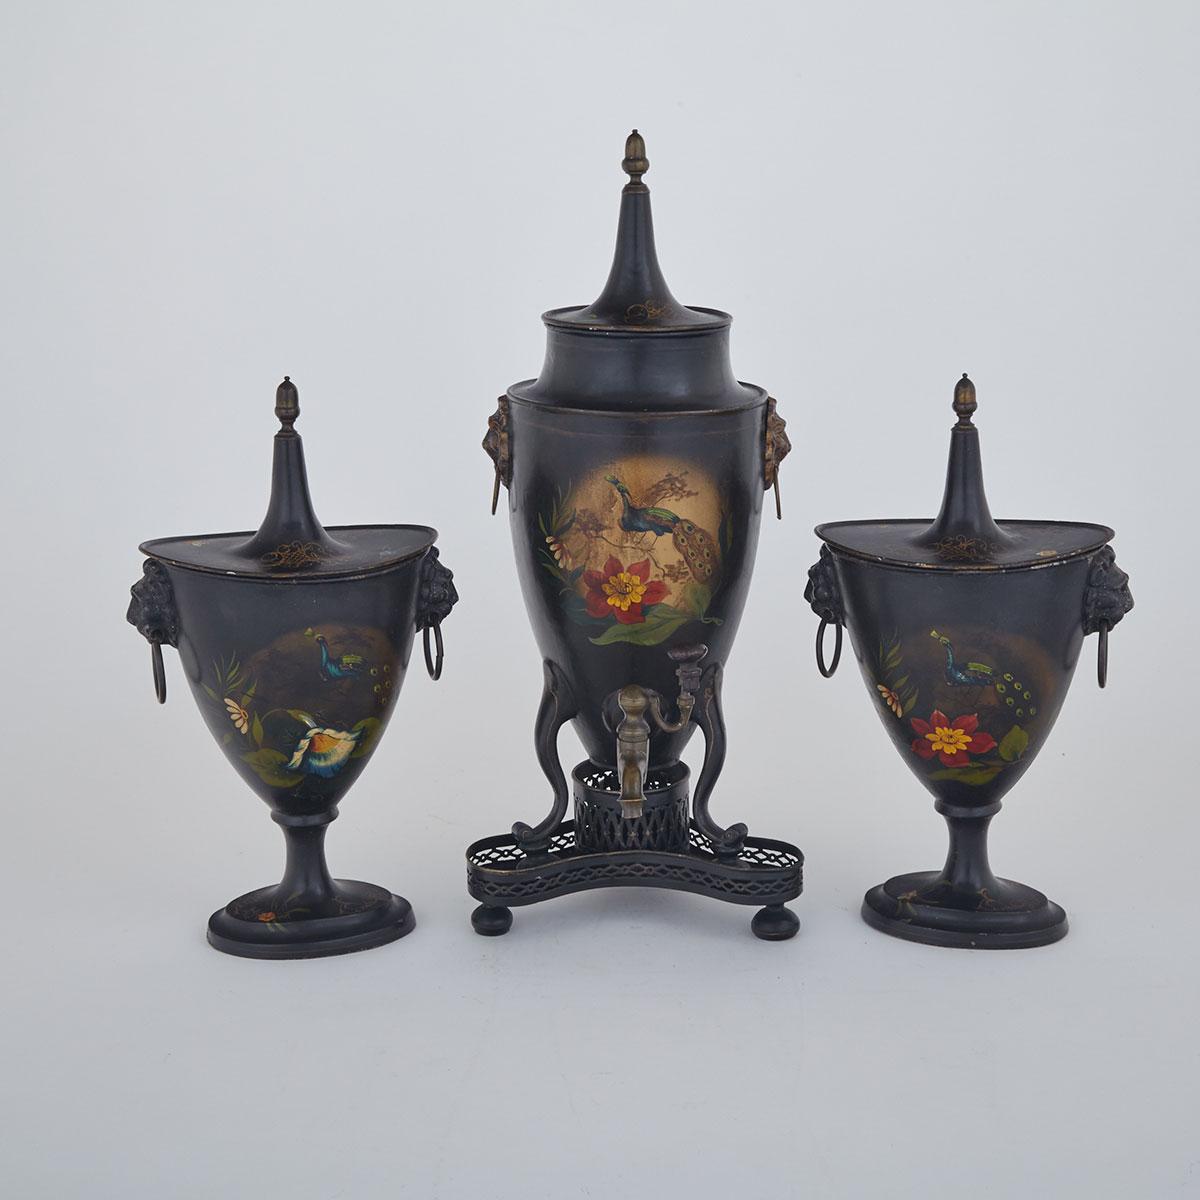 Three Piece Regency Toleware Suite: Pair of Chestnut Urns and Tea Urn on Stand, c.1820